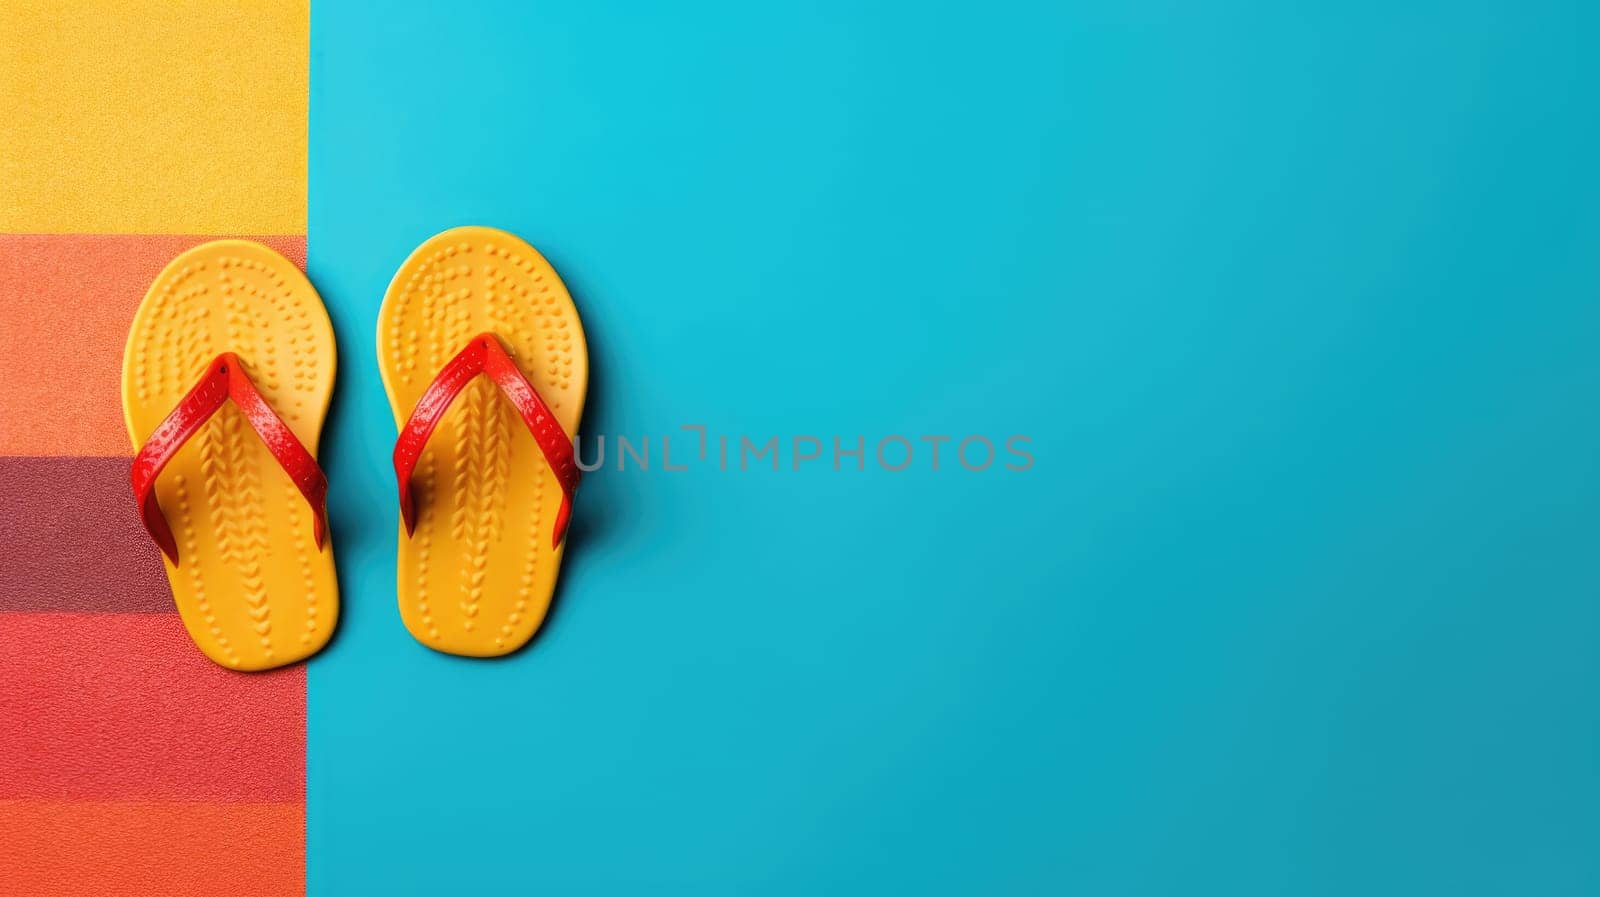 Colored flip-flops on a bright colored background. Summer banner AI